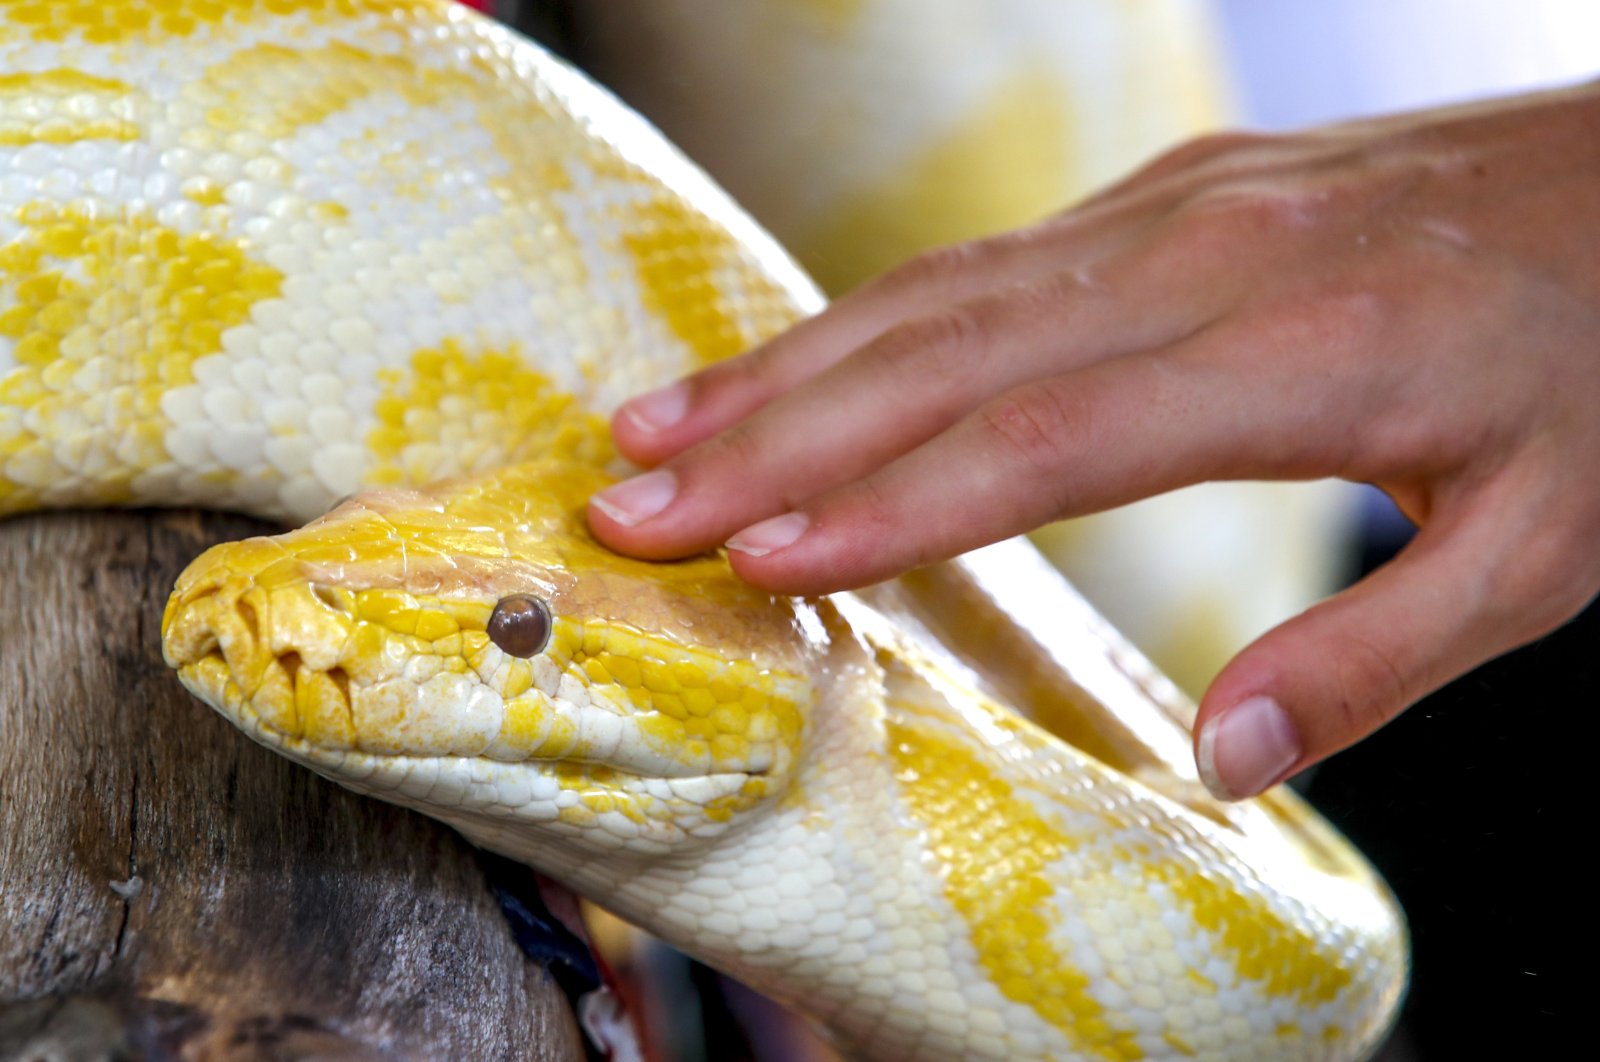 A visitor pets a Burmese Python at the Queen Saovabha Memorial Institute and Snake Farm in Bangkok, Thailand, July  27, 2022. (EPA Photo)